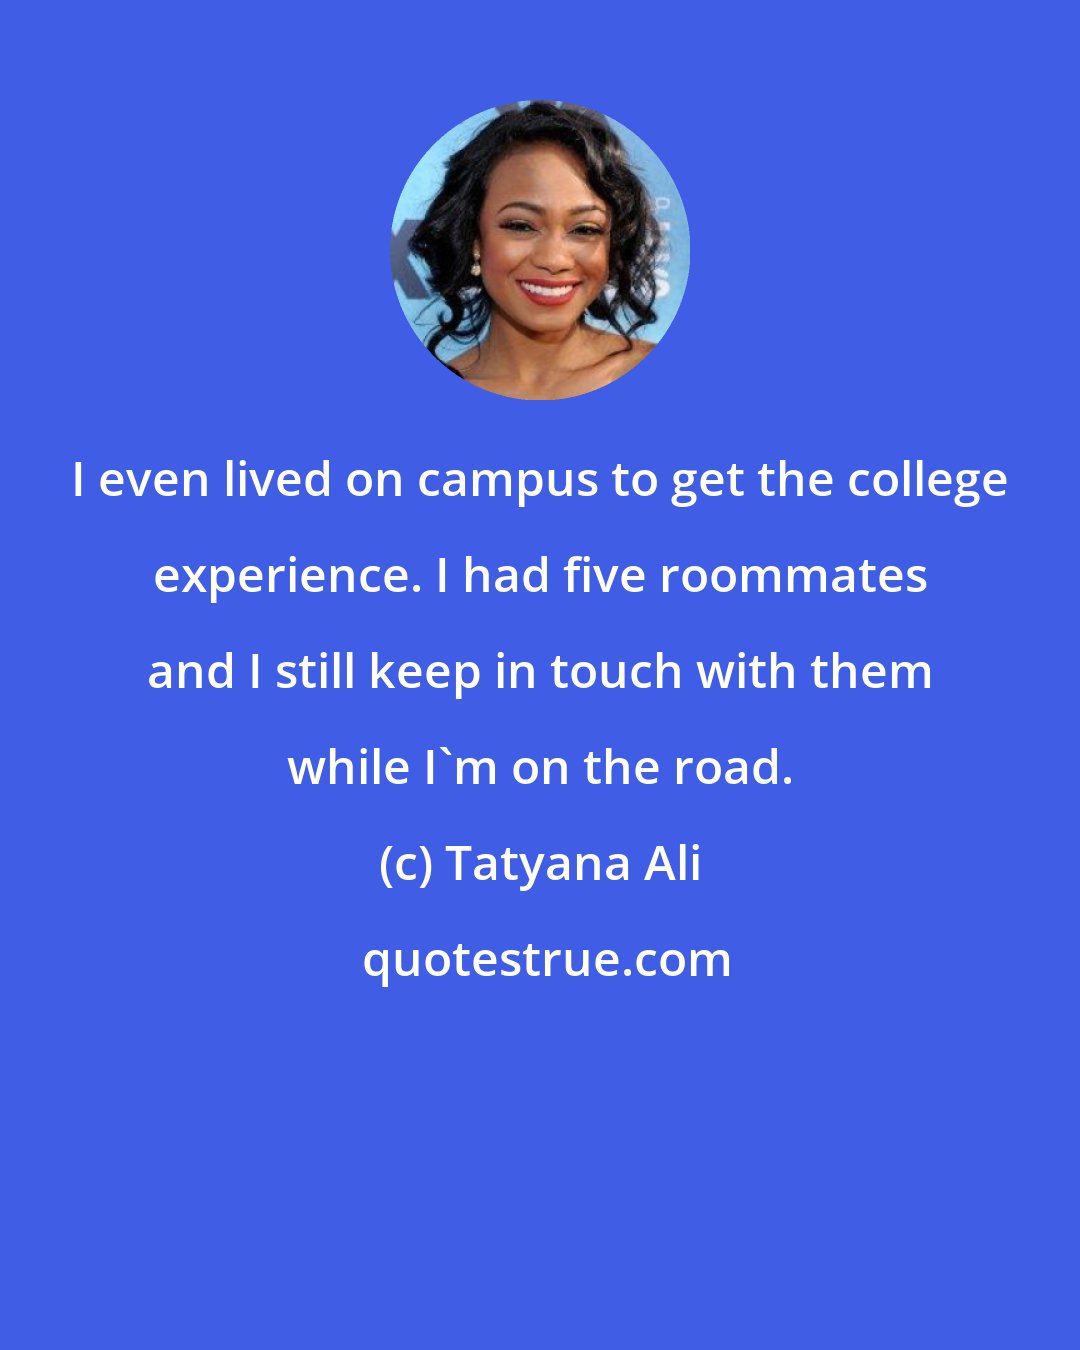 Tatyana Ali: I even lived on campus to get the college experience. I had five roommates and I still keep in touch with them while I'm on the road.